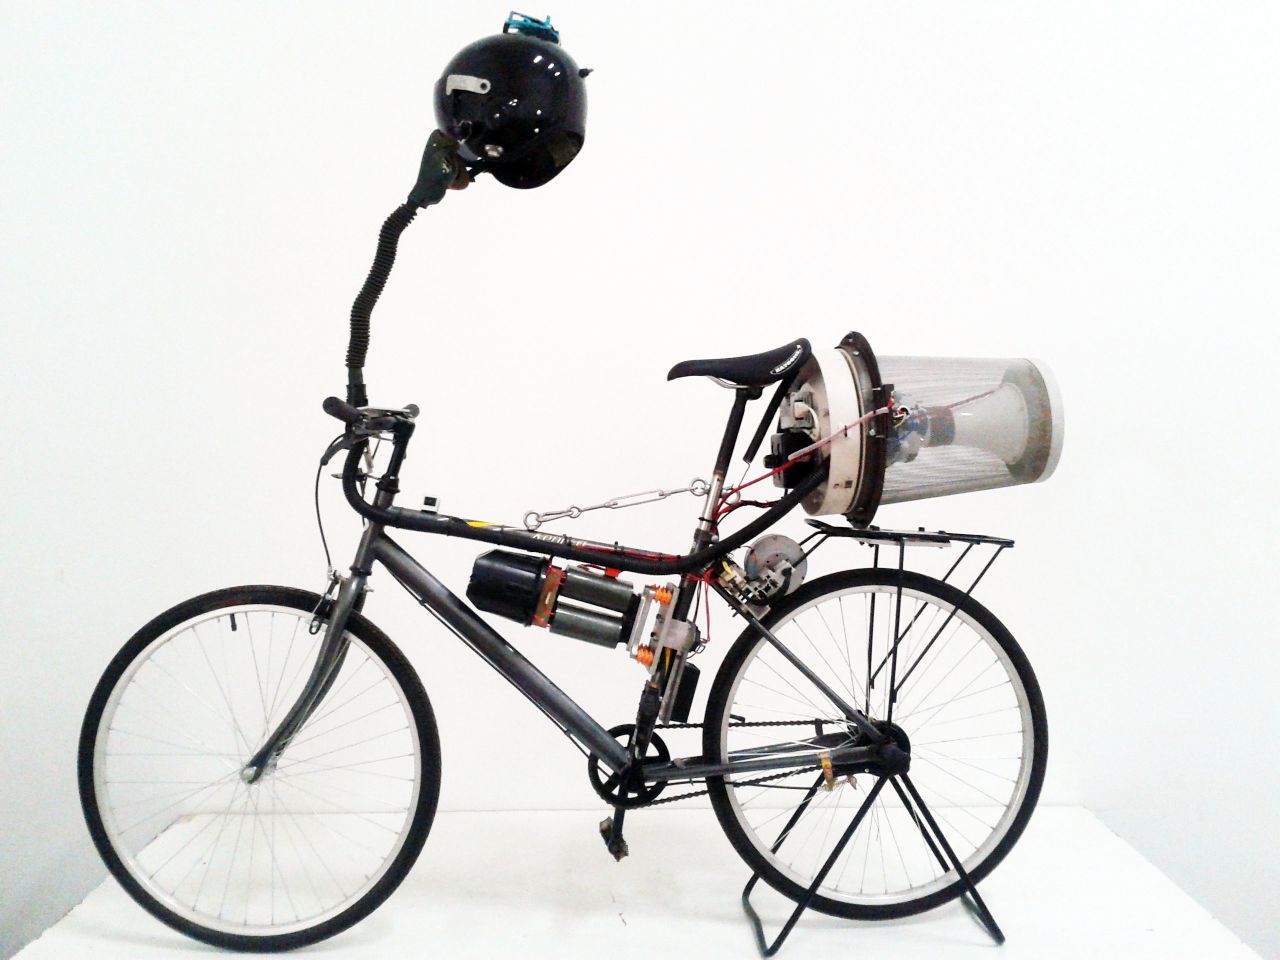 British artist Matt Hope attached a small generator to a bike's back wheel and as he pedals, electricity is produced to power his homemade filtration system. He says it's "an ironic commentary about living in China."